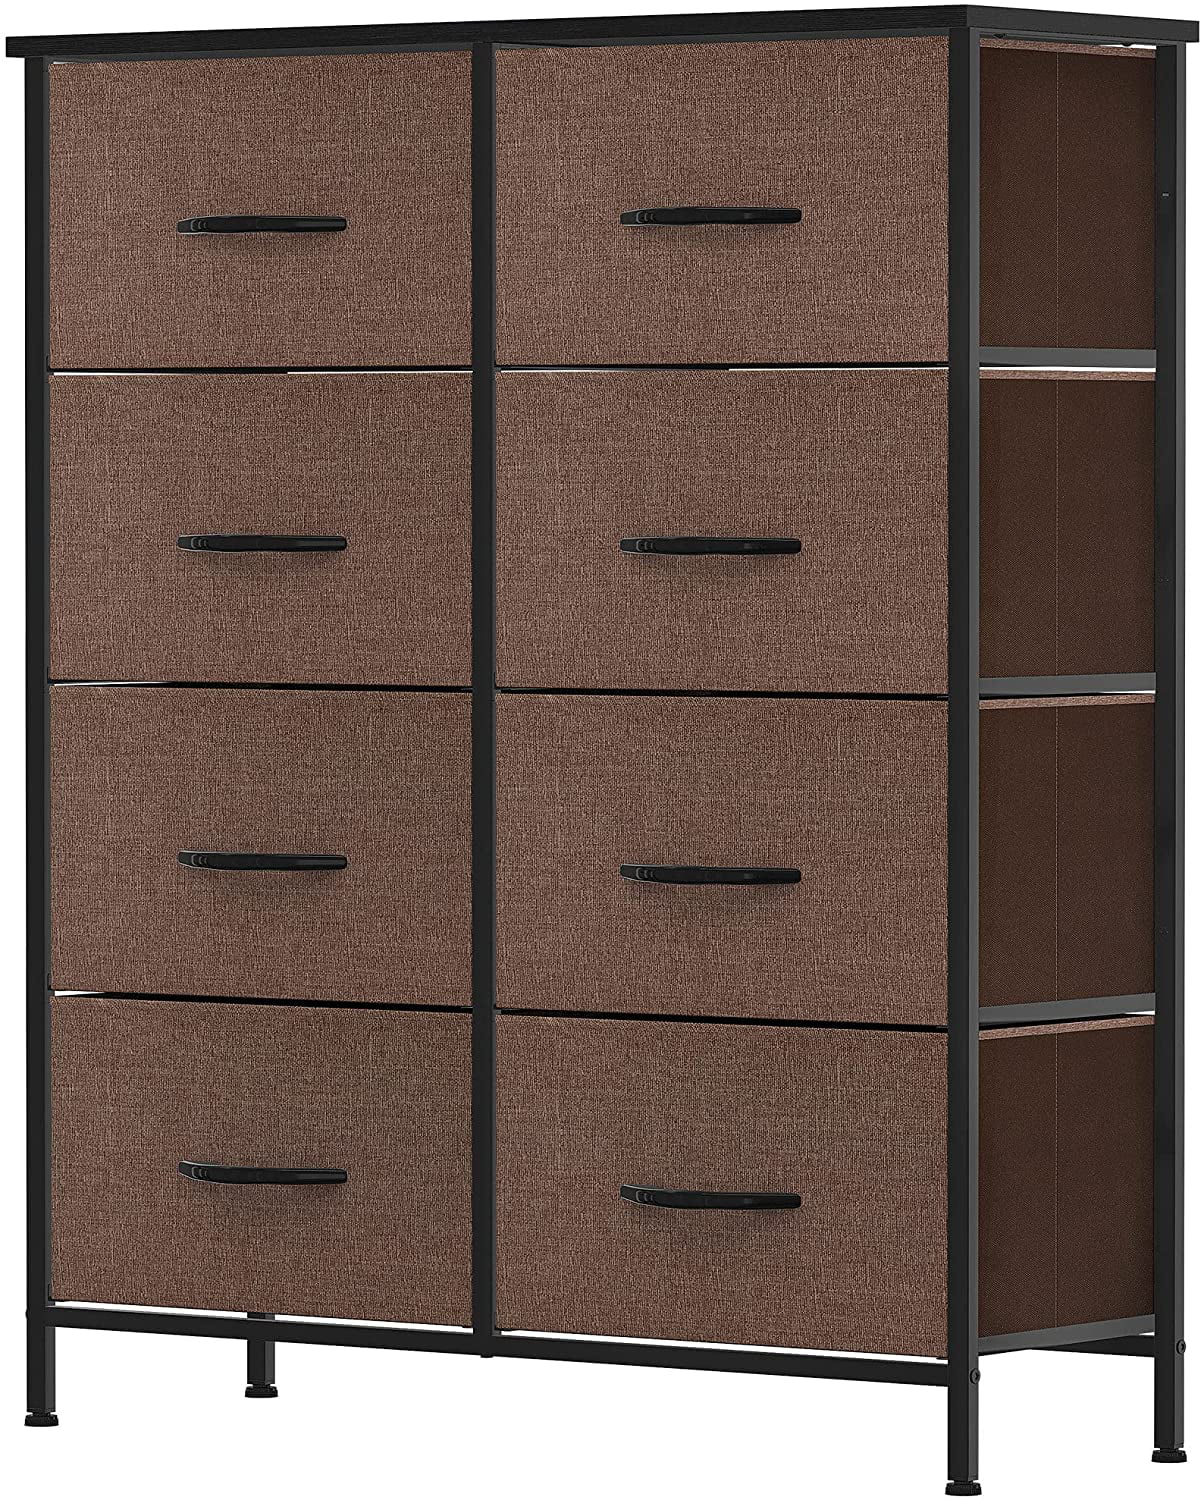 Storage Tower with Large Capacity Organizer Unit for Bedroom Living Room & Closets Sturdy Steel Frame Black/ Grey YITAHOME Fabric Dresser with 7 Drawers Easy Pull Fabric Bins & Wooden Top